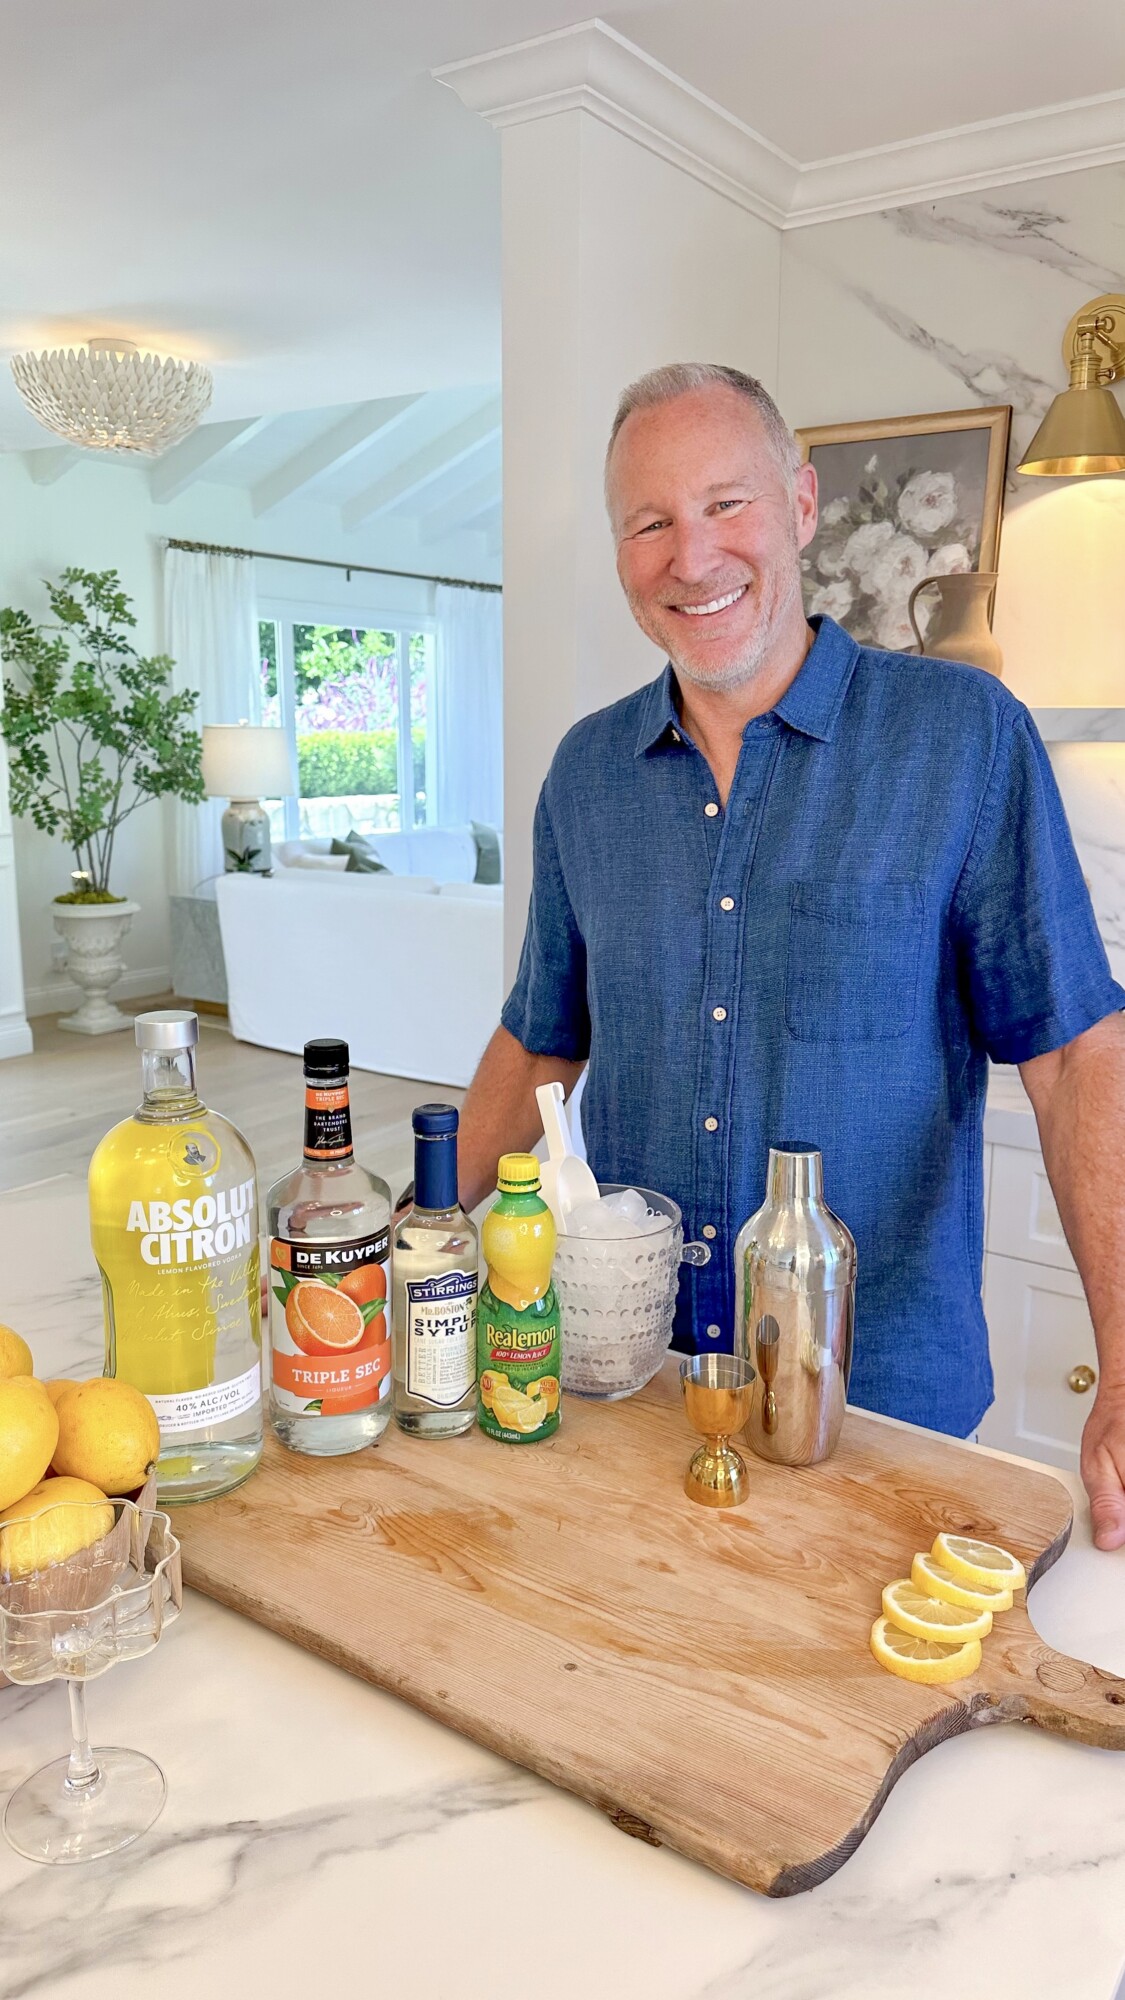 Jeff smiling in kitchen with lemon drop setup, liquor on cutting board